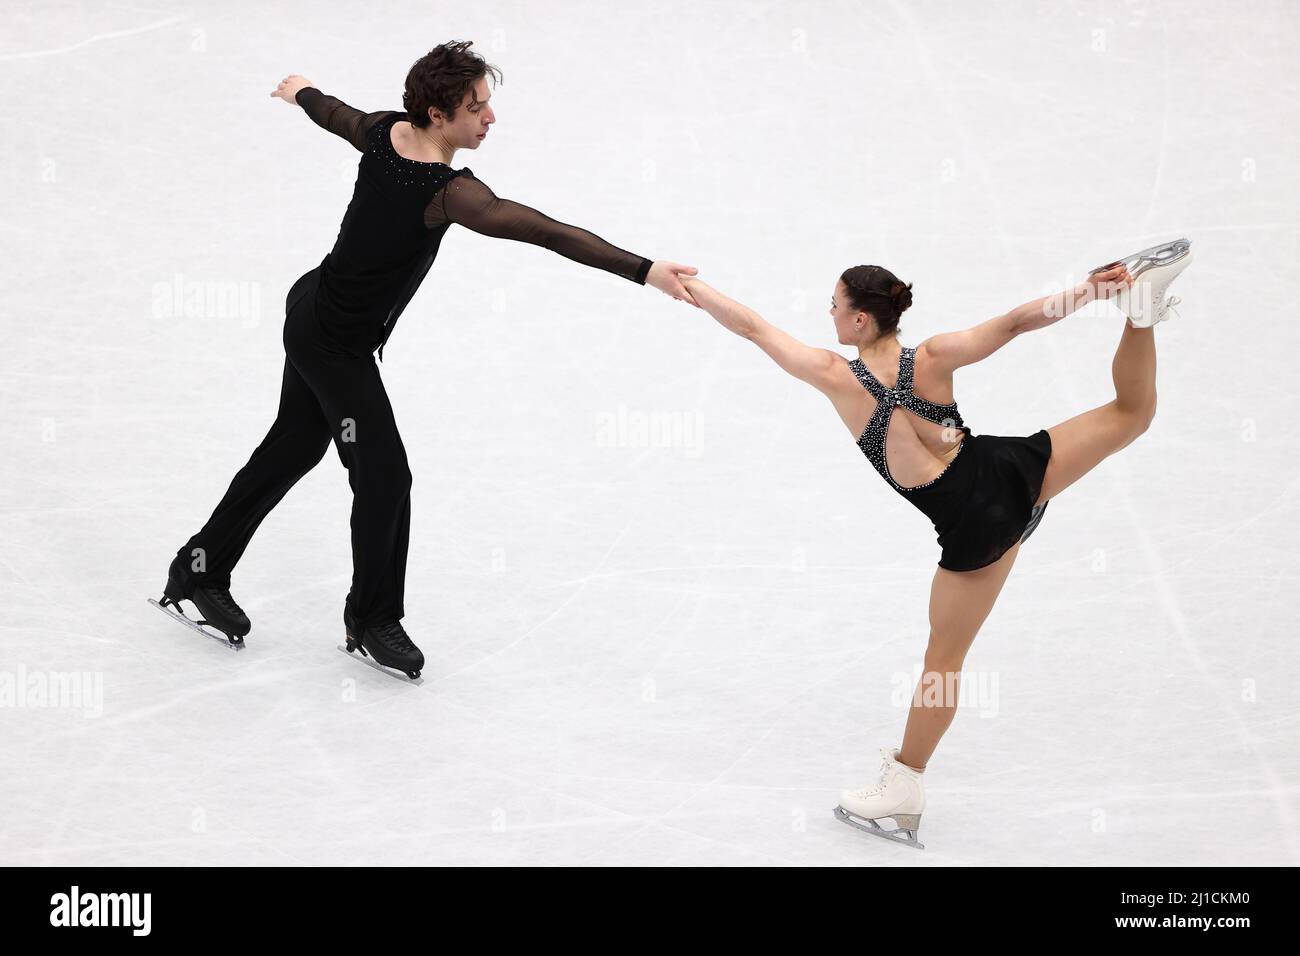 Dorota BRODA & Pedro BETEGON MARTIN (ESP), during Pairs Free Skating, at the ISU World Figure Skating Championships 2022 at Sud de France Arena, on March 24, 2022 in Montpellier Occitanie, France. Credit: Raniero Corbelletti/AFLO/Alamy Live News Stock Photo